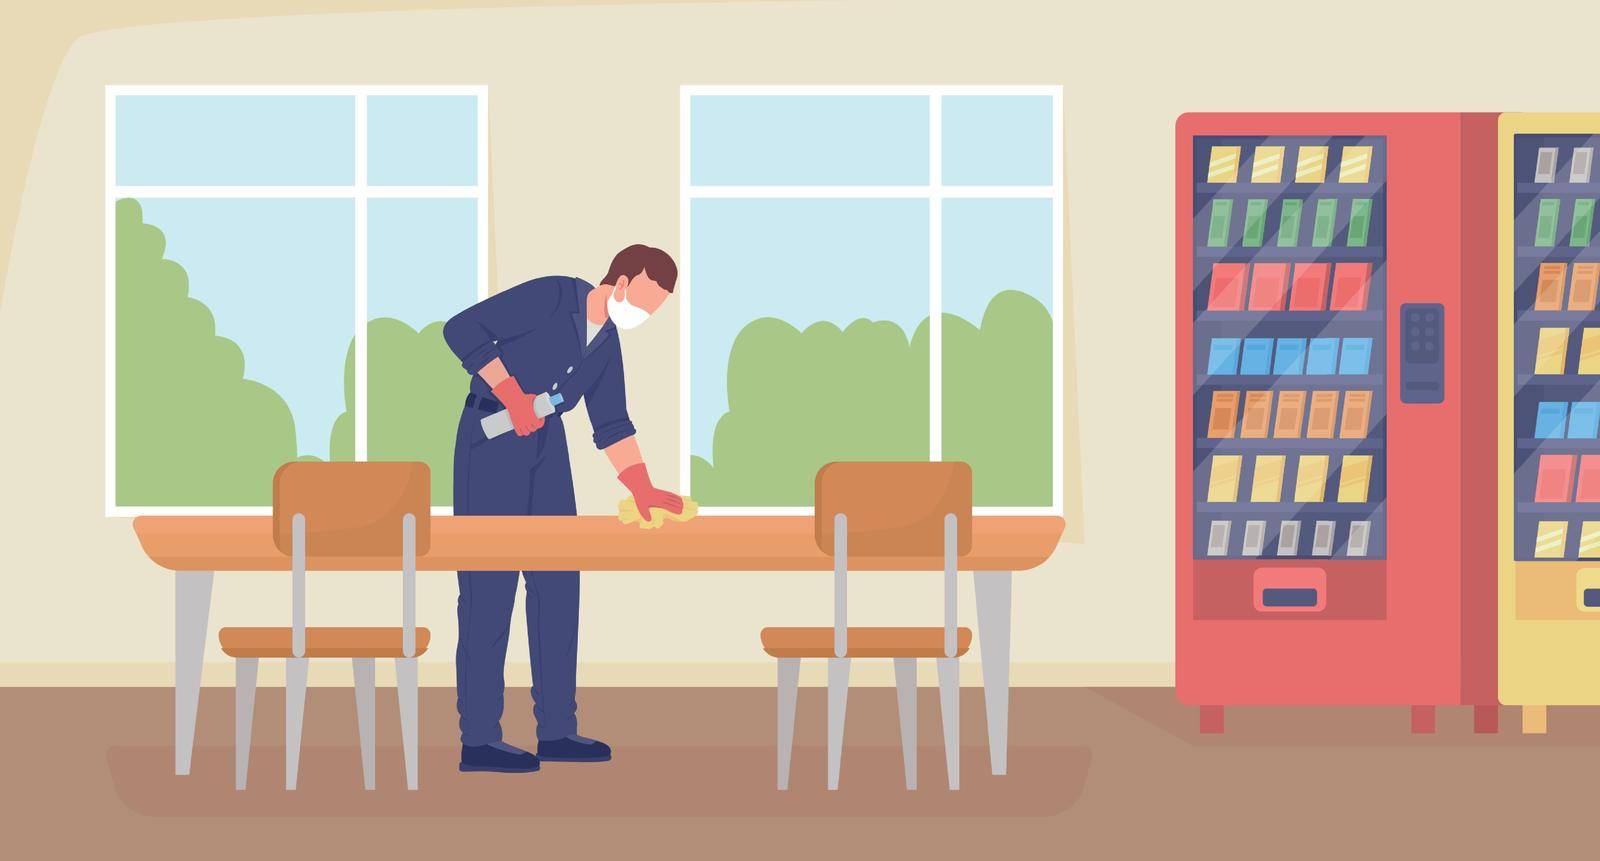 Cleaning cafeteria flat color vector illustration by ntl